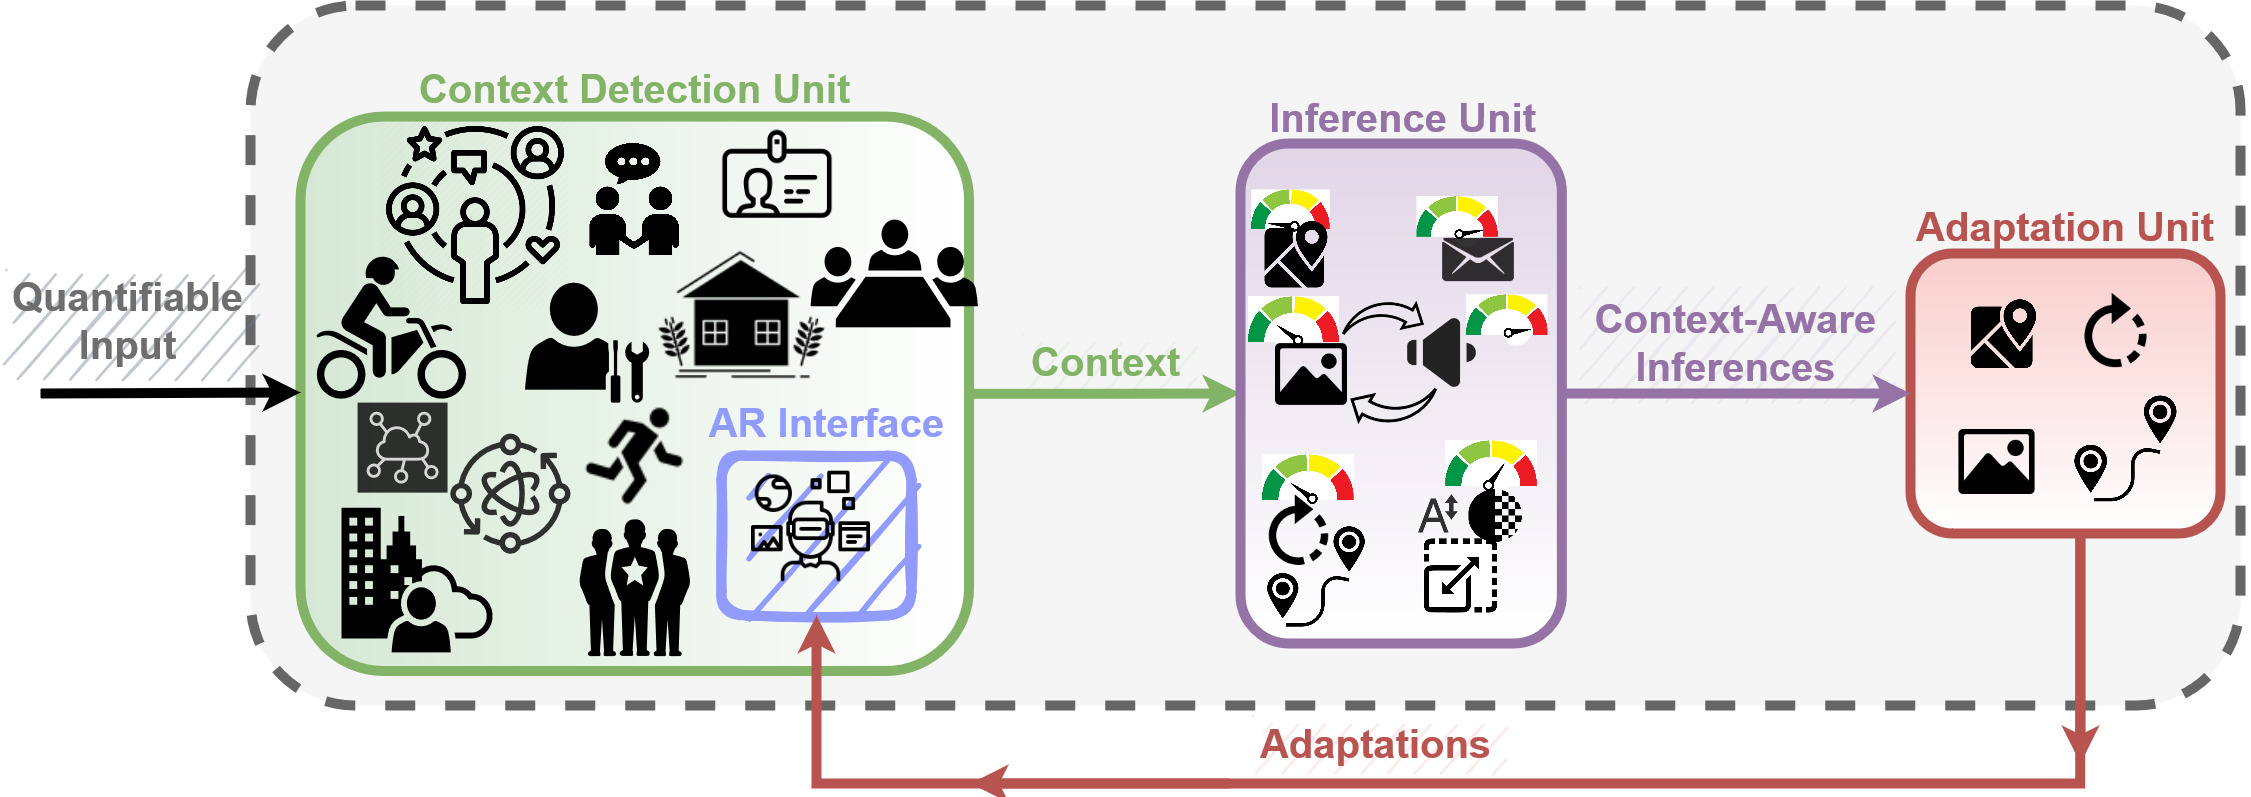 Context-Aware Inference and Adaptation: A Framework for Designing Intelligent AR Interfaces